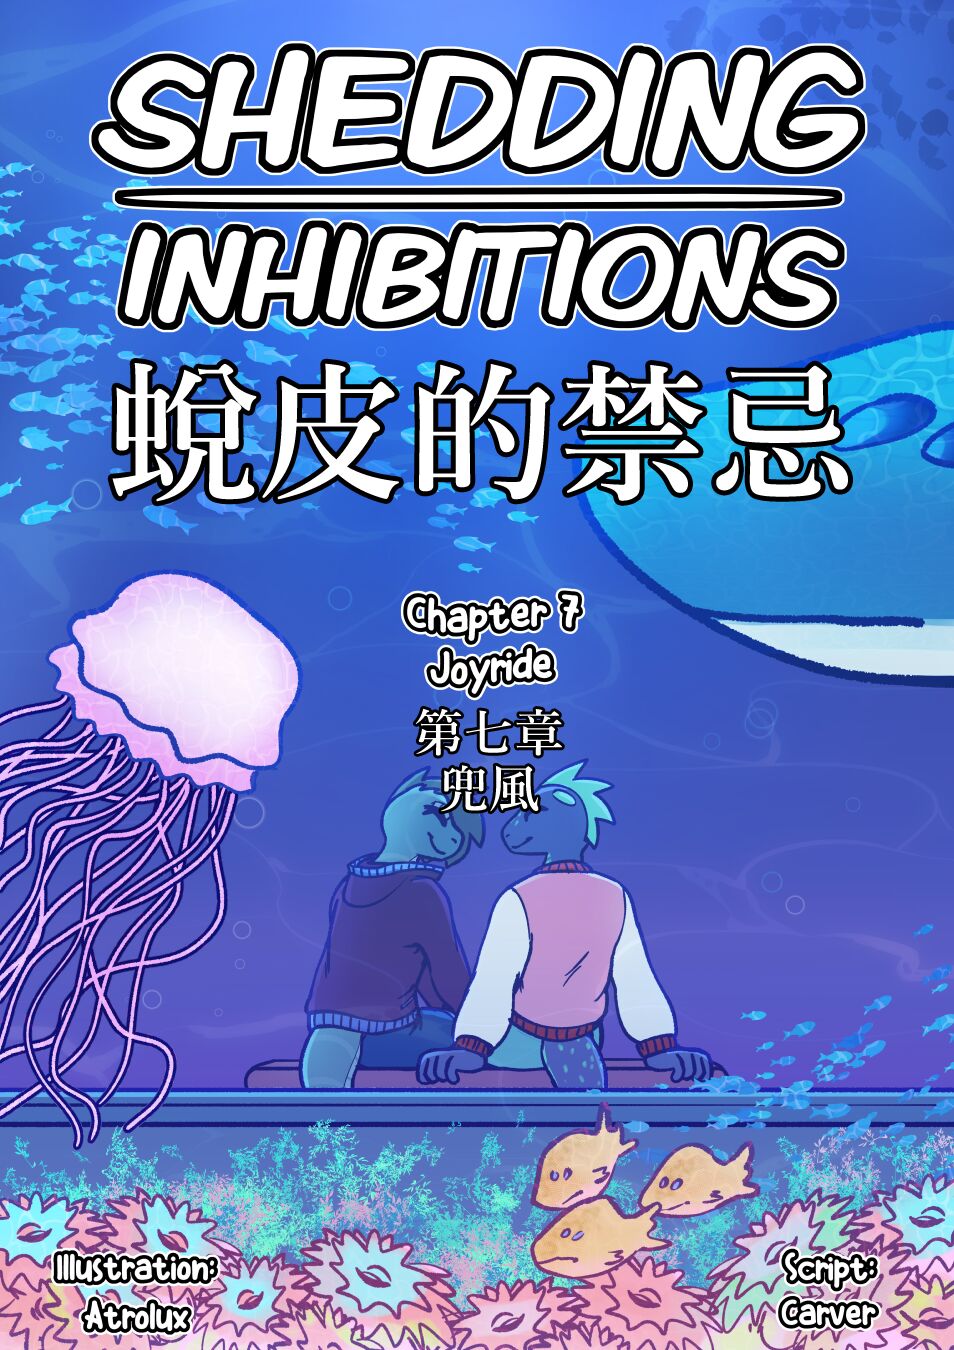 [Atrolux] Shedding Inhibitions Ch. 7 [chinese] 